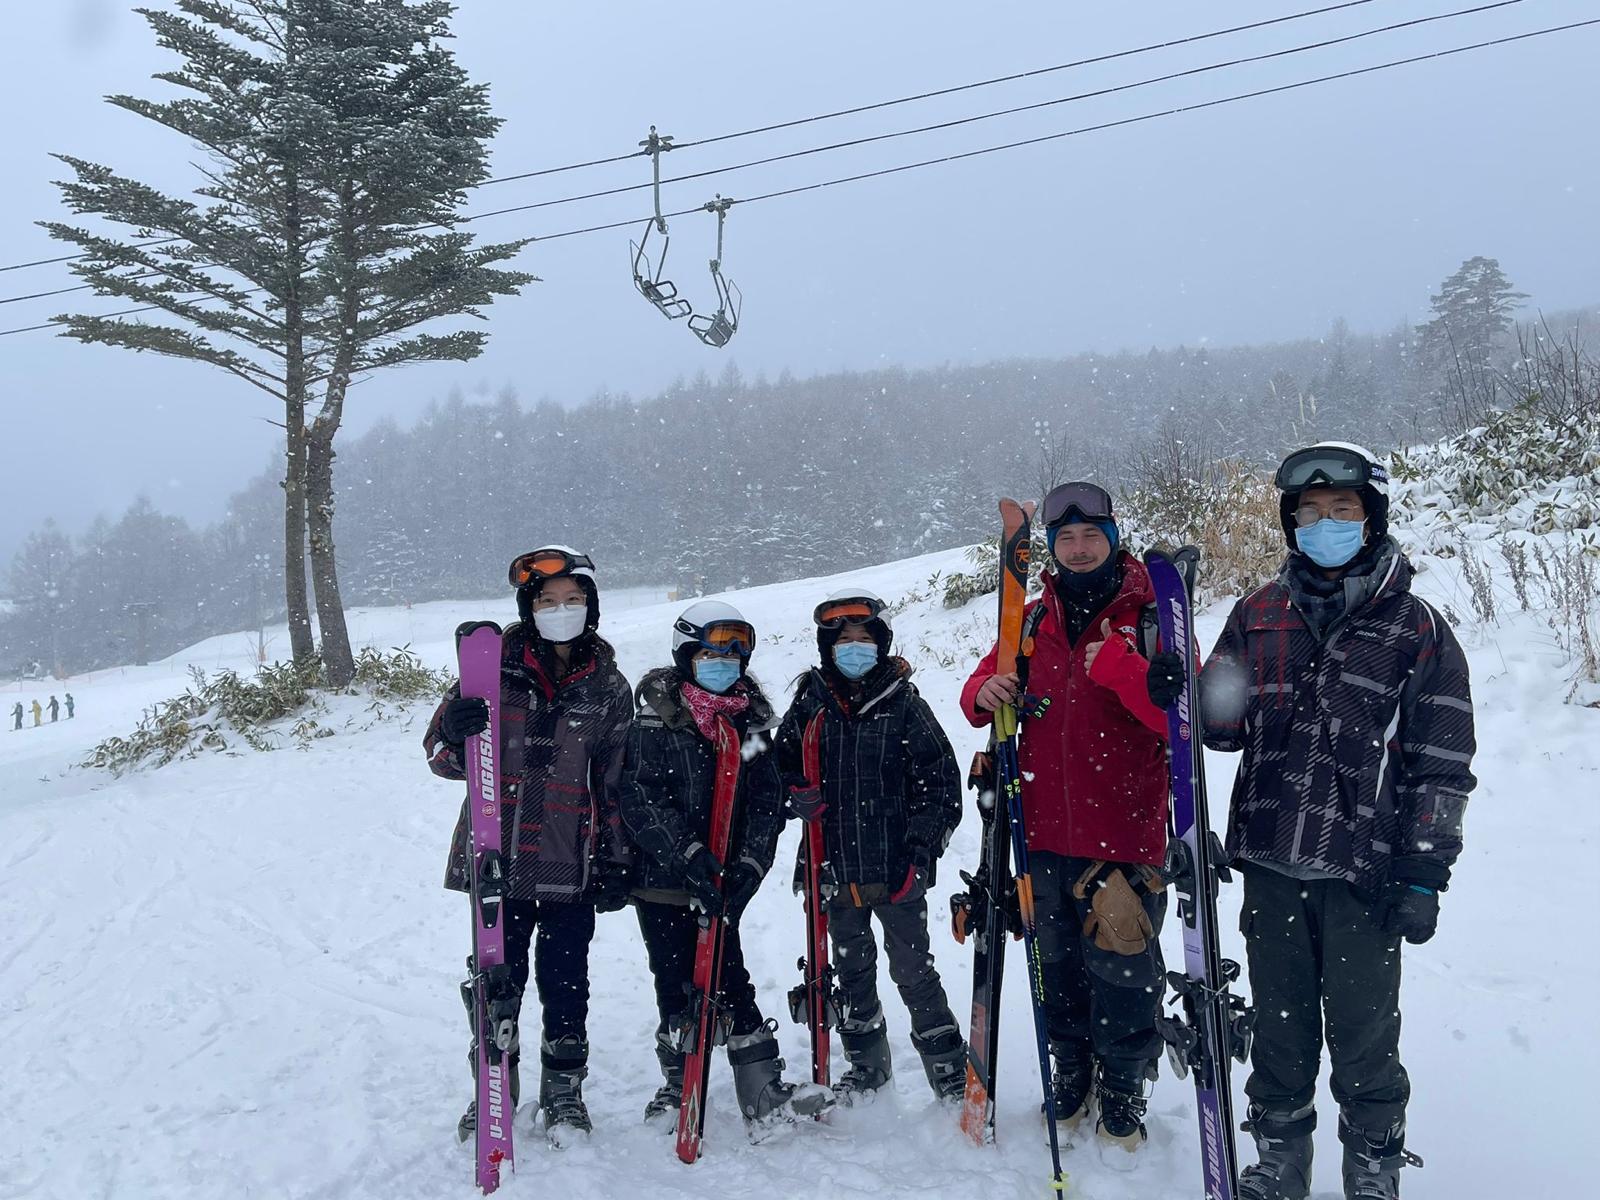 The kids first ski experience with their ski instructor - Rafal